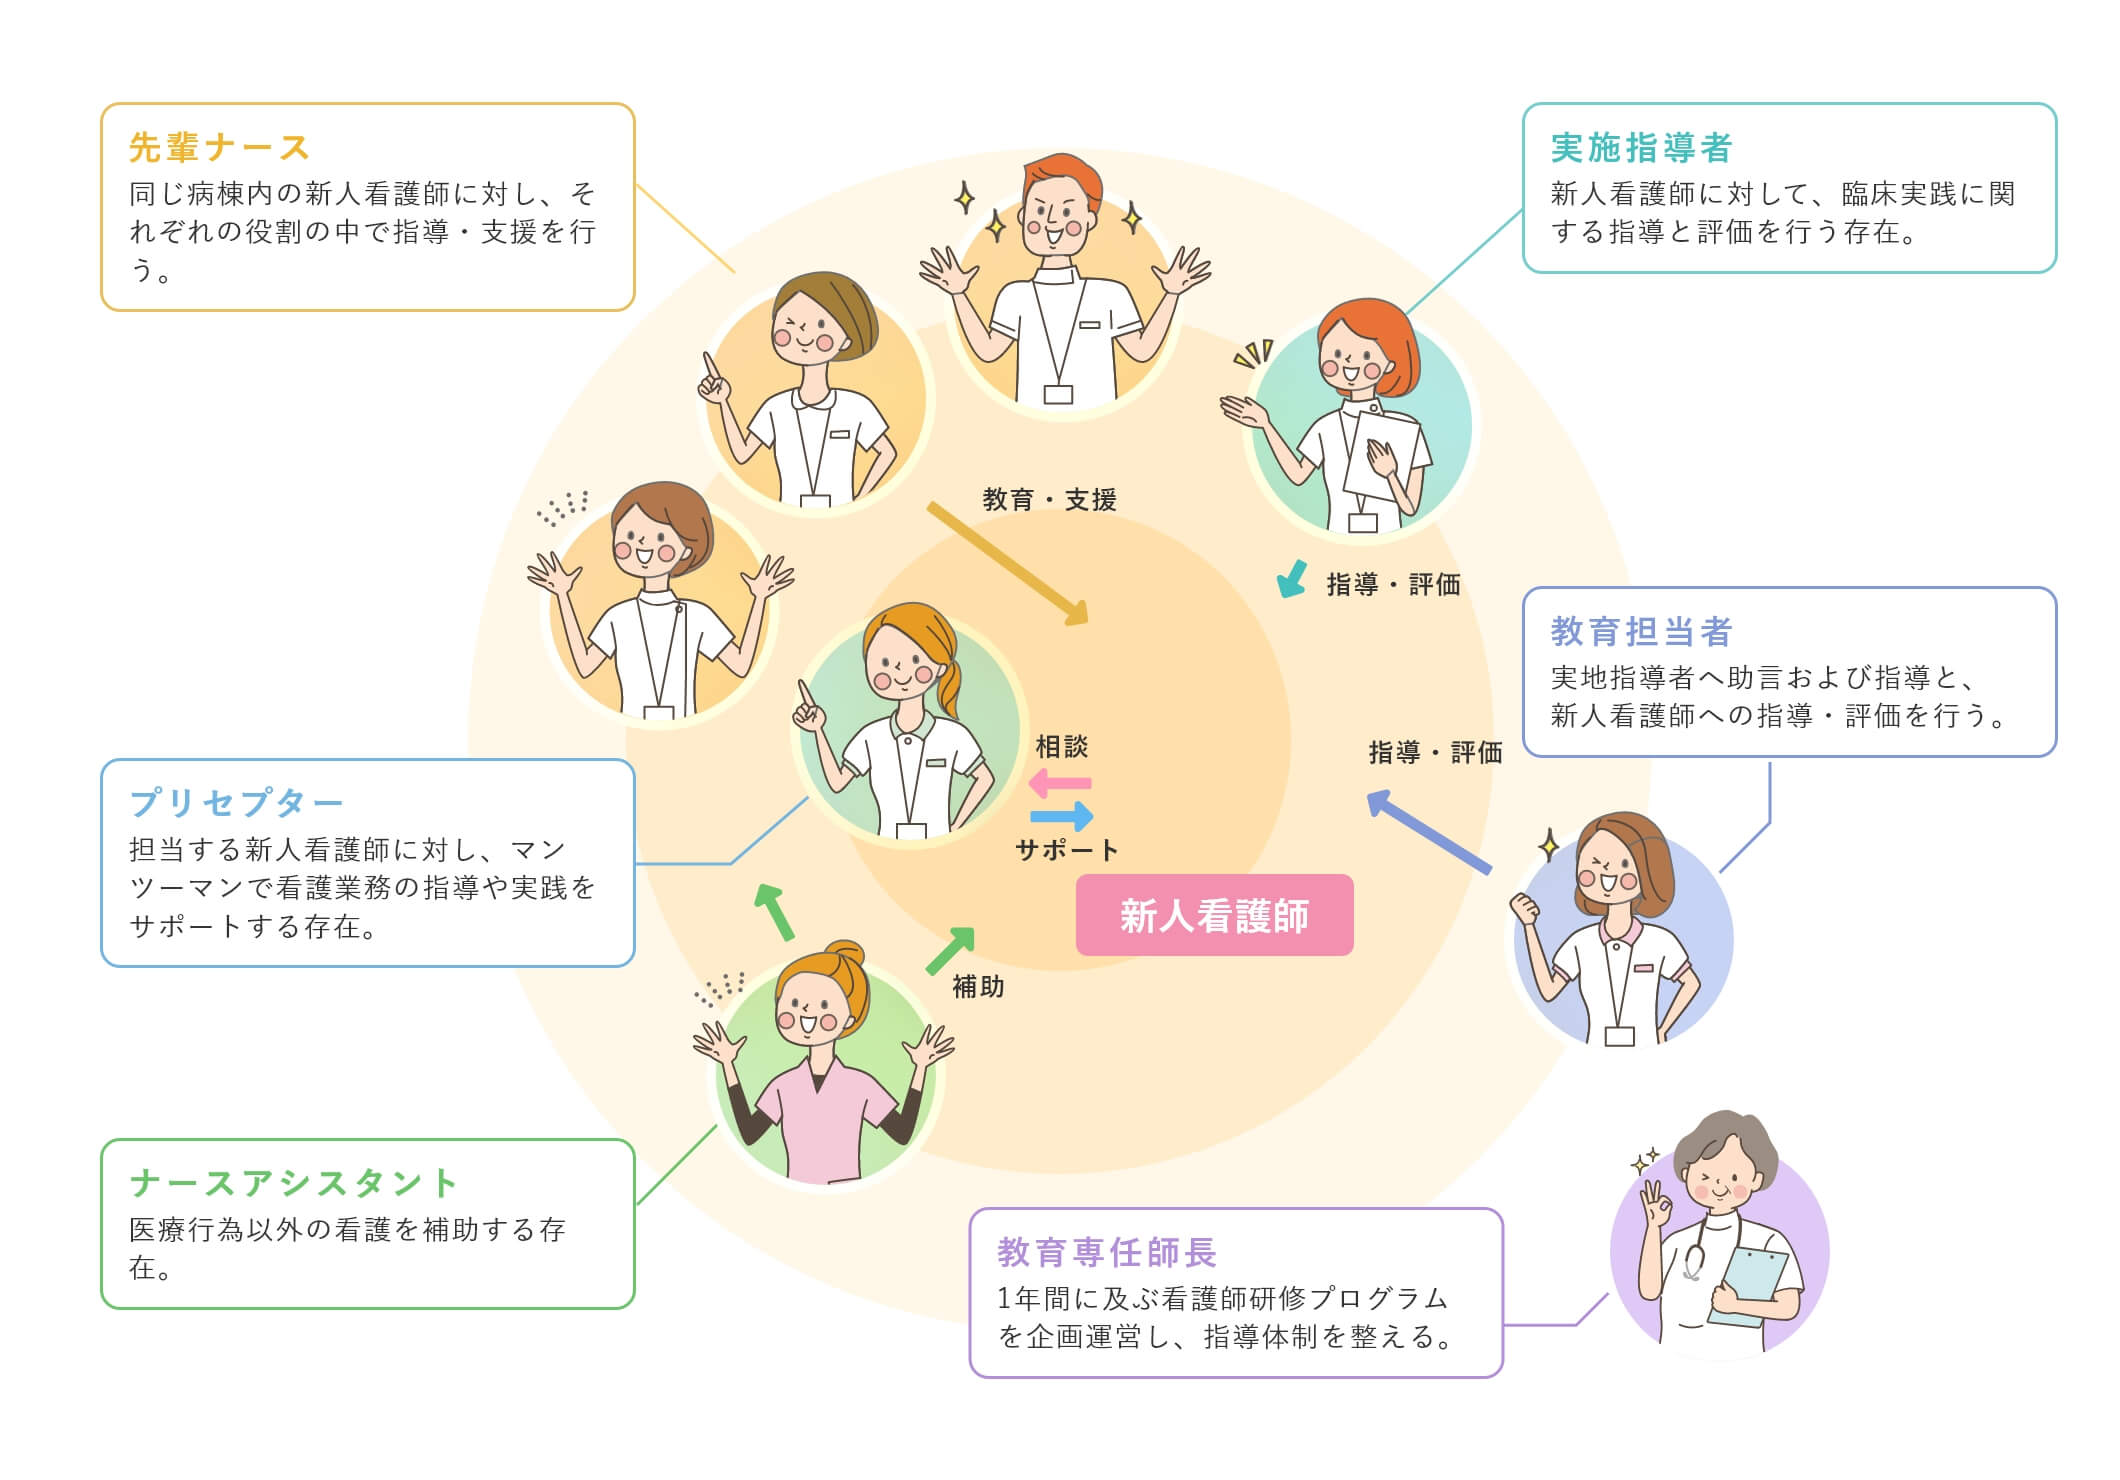 EDUCATION SUPPORT SYSTEM WITHIN THE GROUP グループ内での教育支援体制